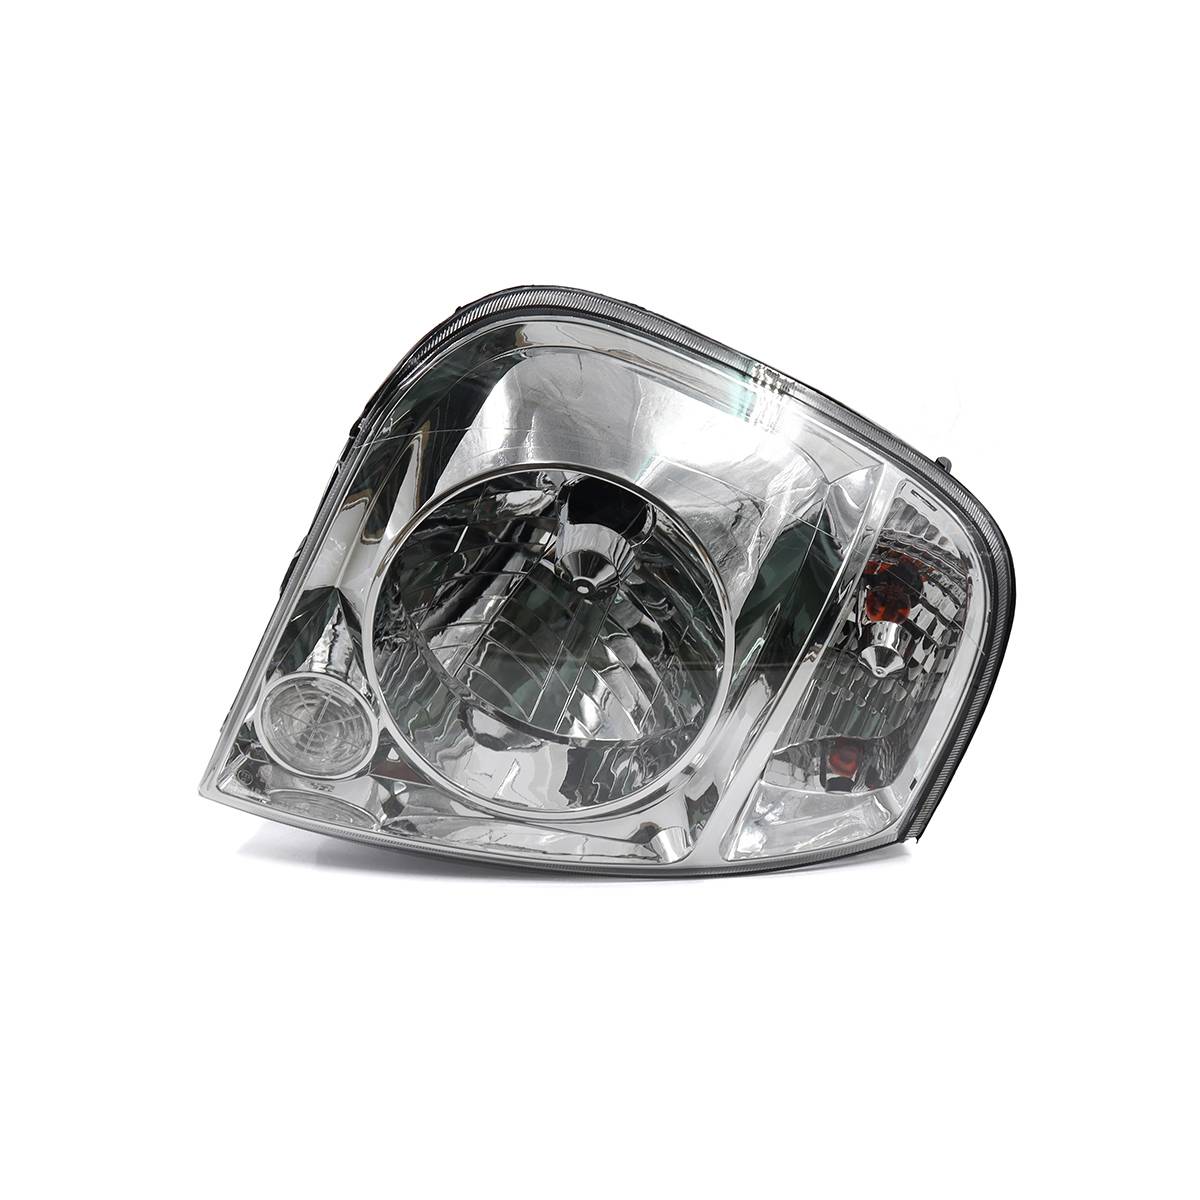 Geling High Quality Car Accessories Headlight  Head Lamp for KIA Boongo 3 White